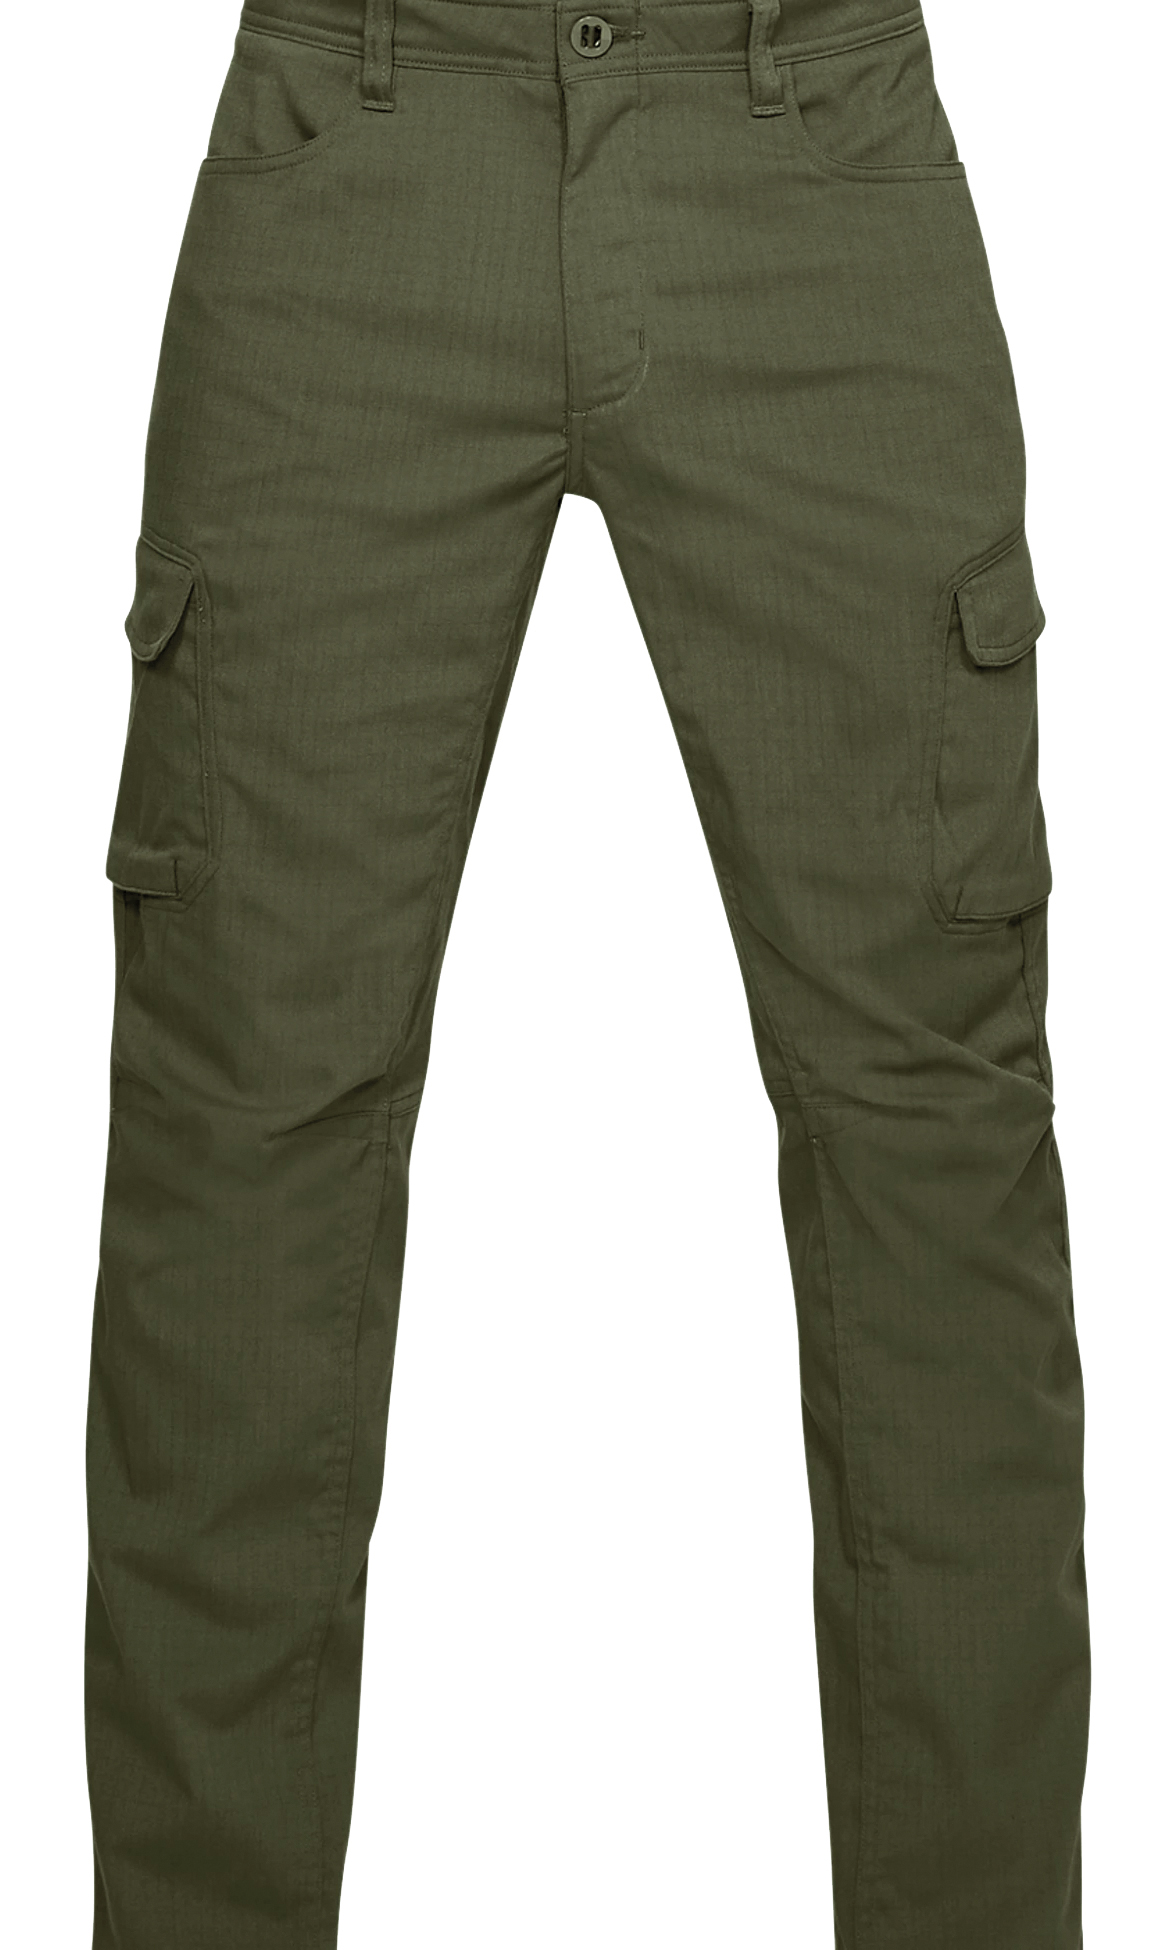 UNDER ARMOUR ENDURO CARGO PANTS – Irene Arms and Outdoor